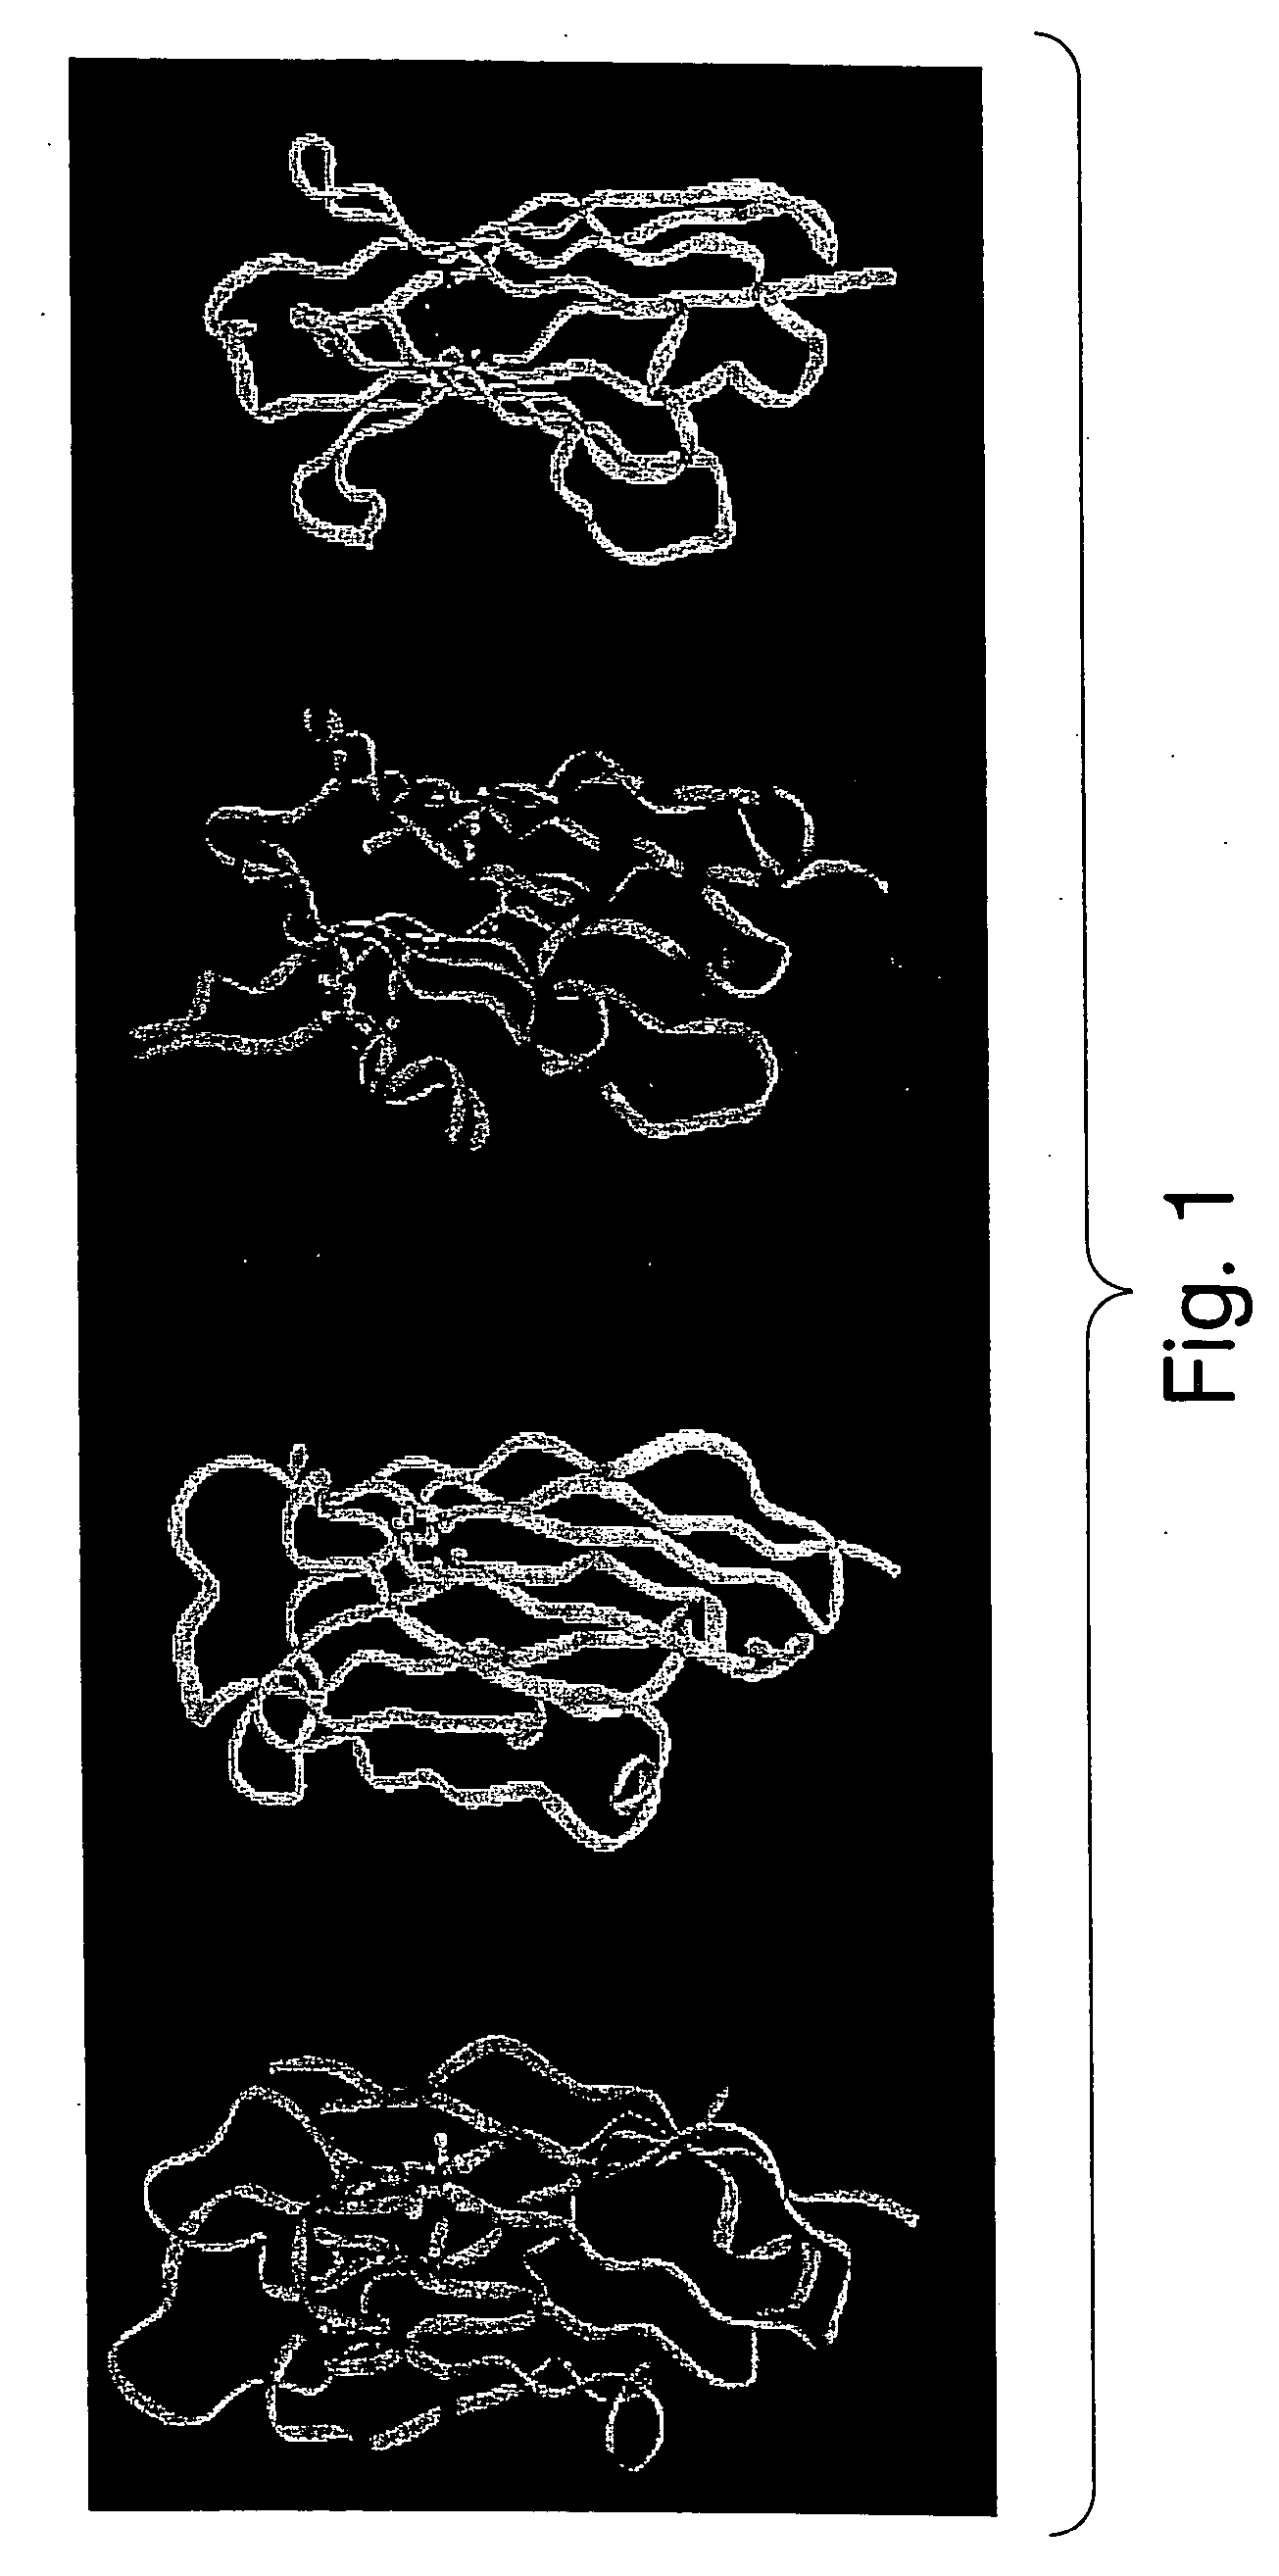 Protein scaffolds for antibody mimics and other binding proteins